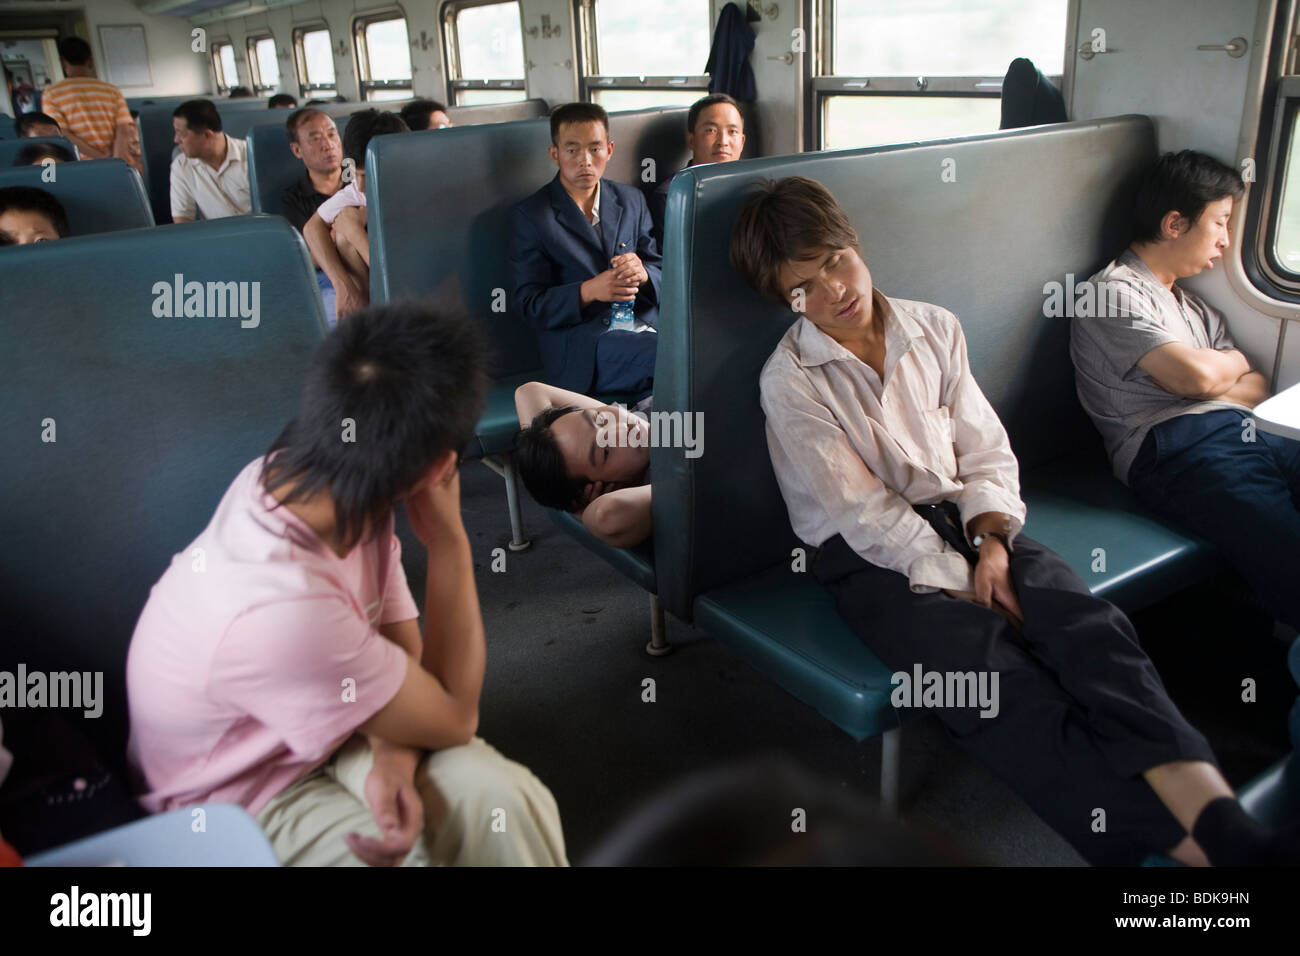 JIEXIU, SHANXI PROVINCE, CHINA - AUGUST 2007: Passengers on an inter-city train sleep in the early morning. Stock Photo